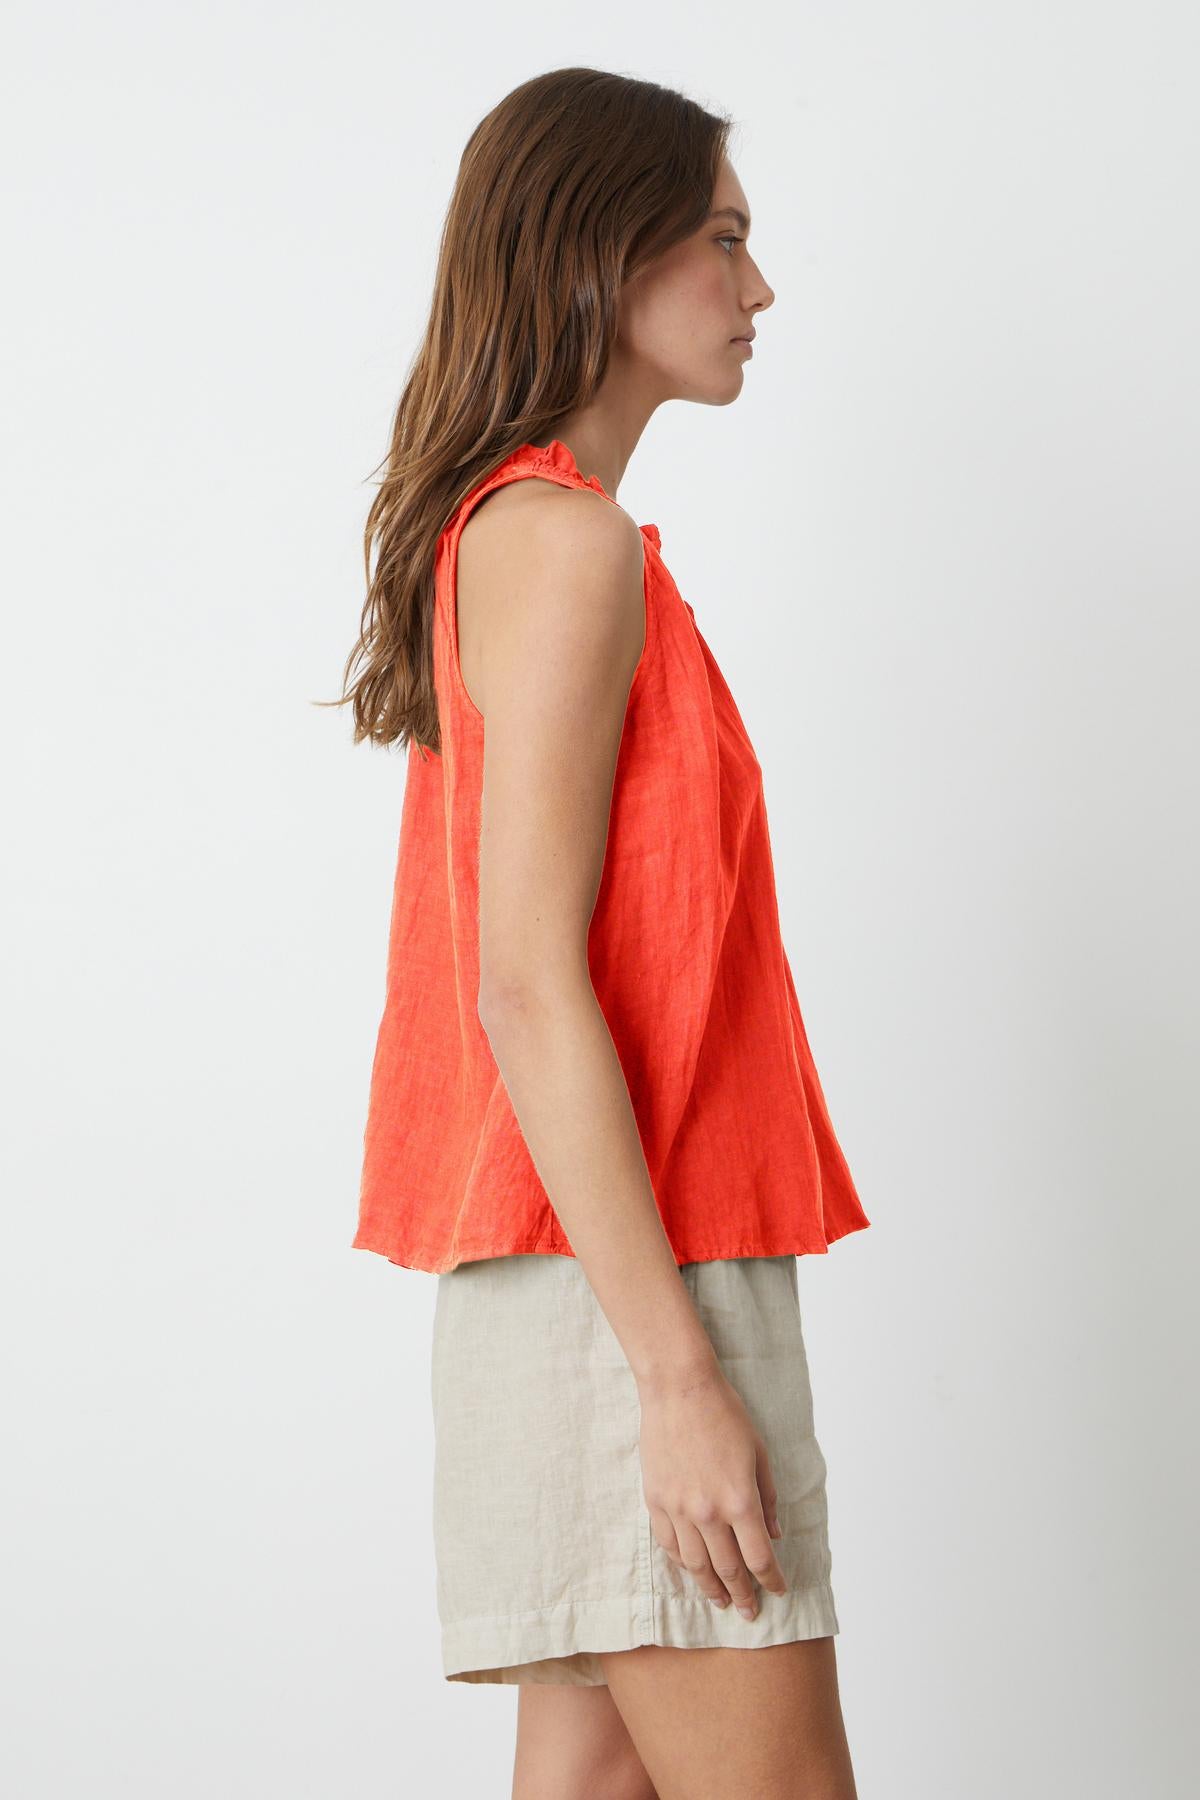 The back view of a woman wearing a ZOEY LINEN V-NECK TANK TOP by Velvet by Graham & Spencer and tan shorts.-26445317701825